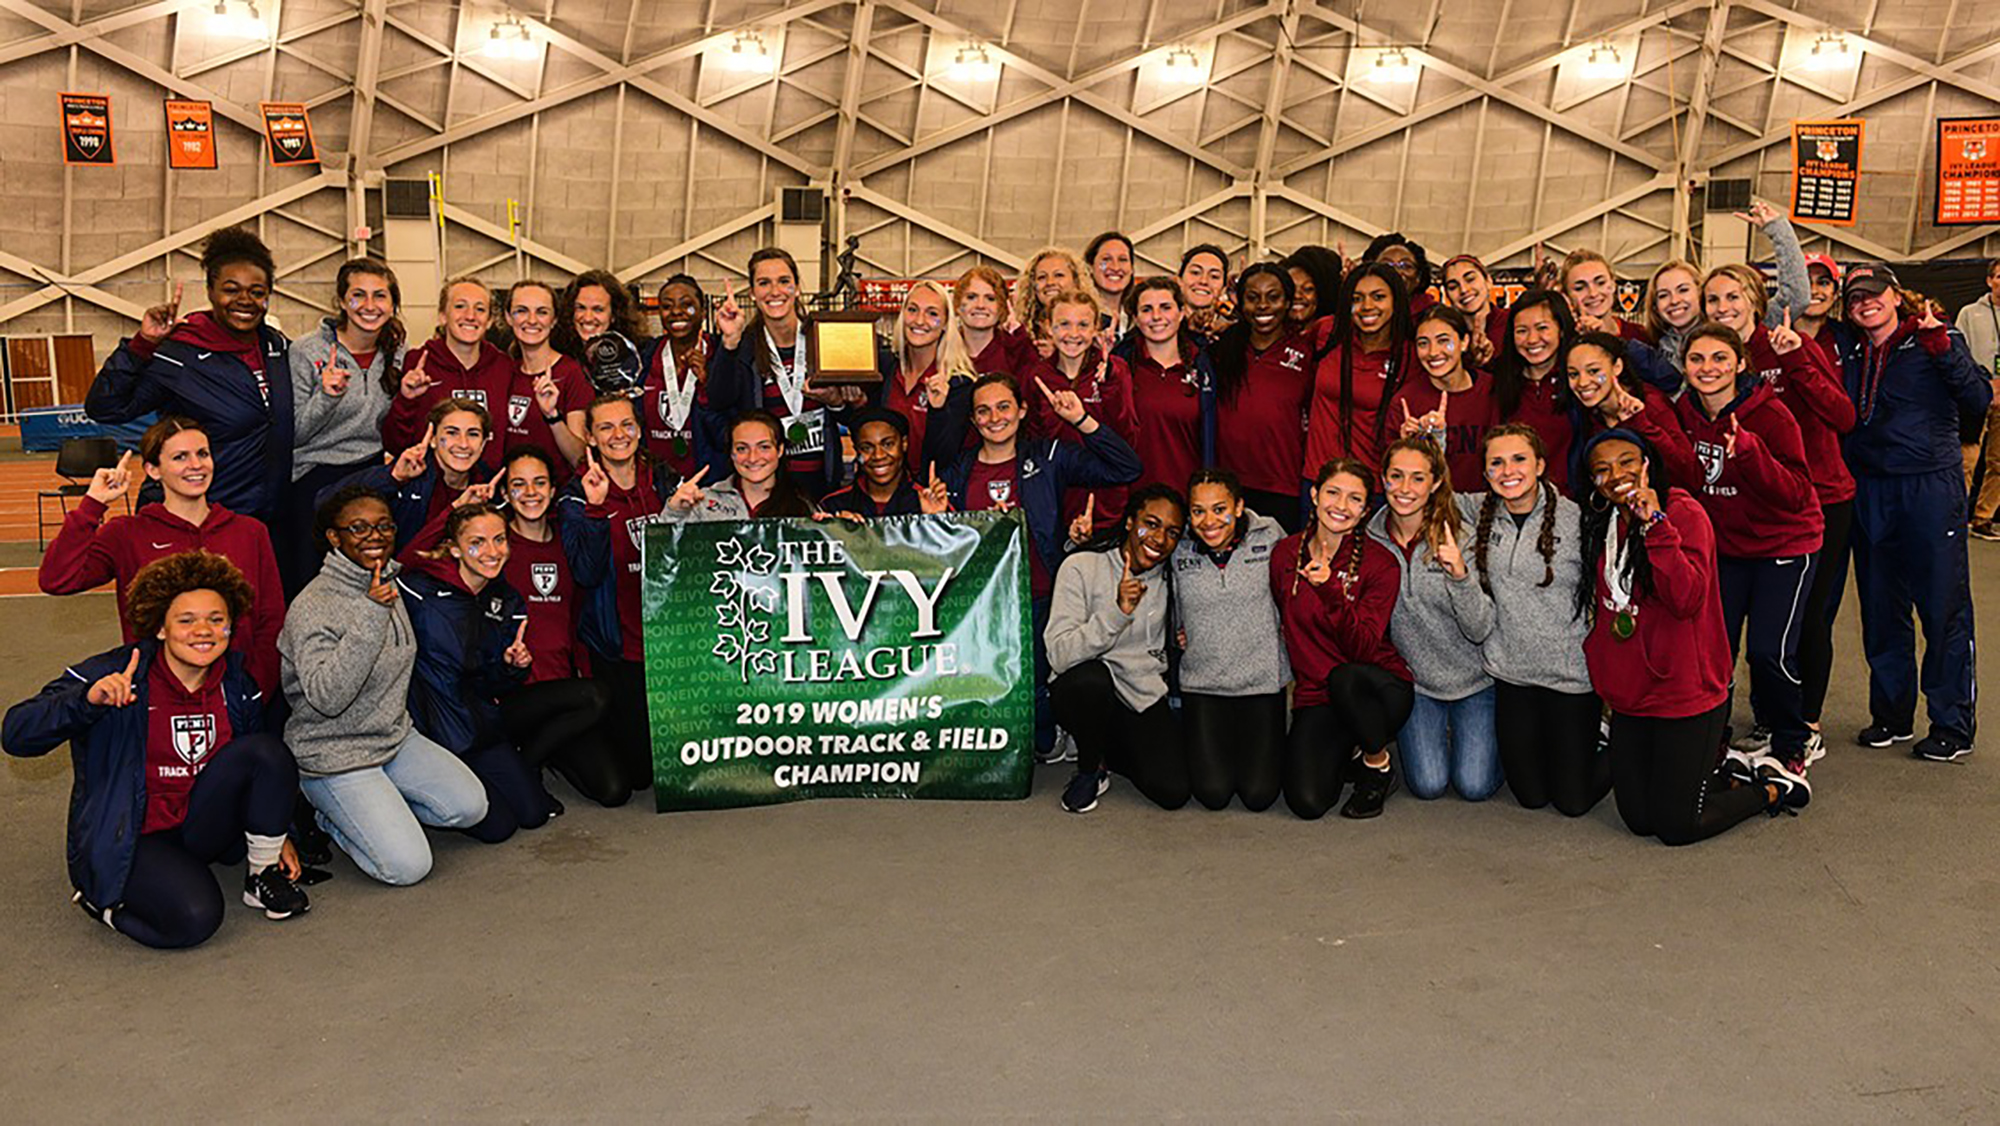 Members of the women's track and field team pose with the 2019 Outdoor Ivy Heps championship banner.